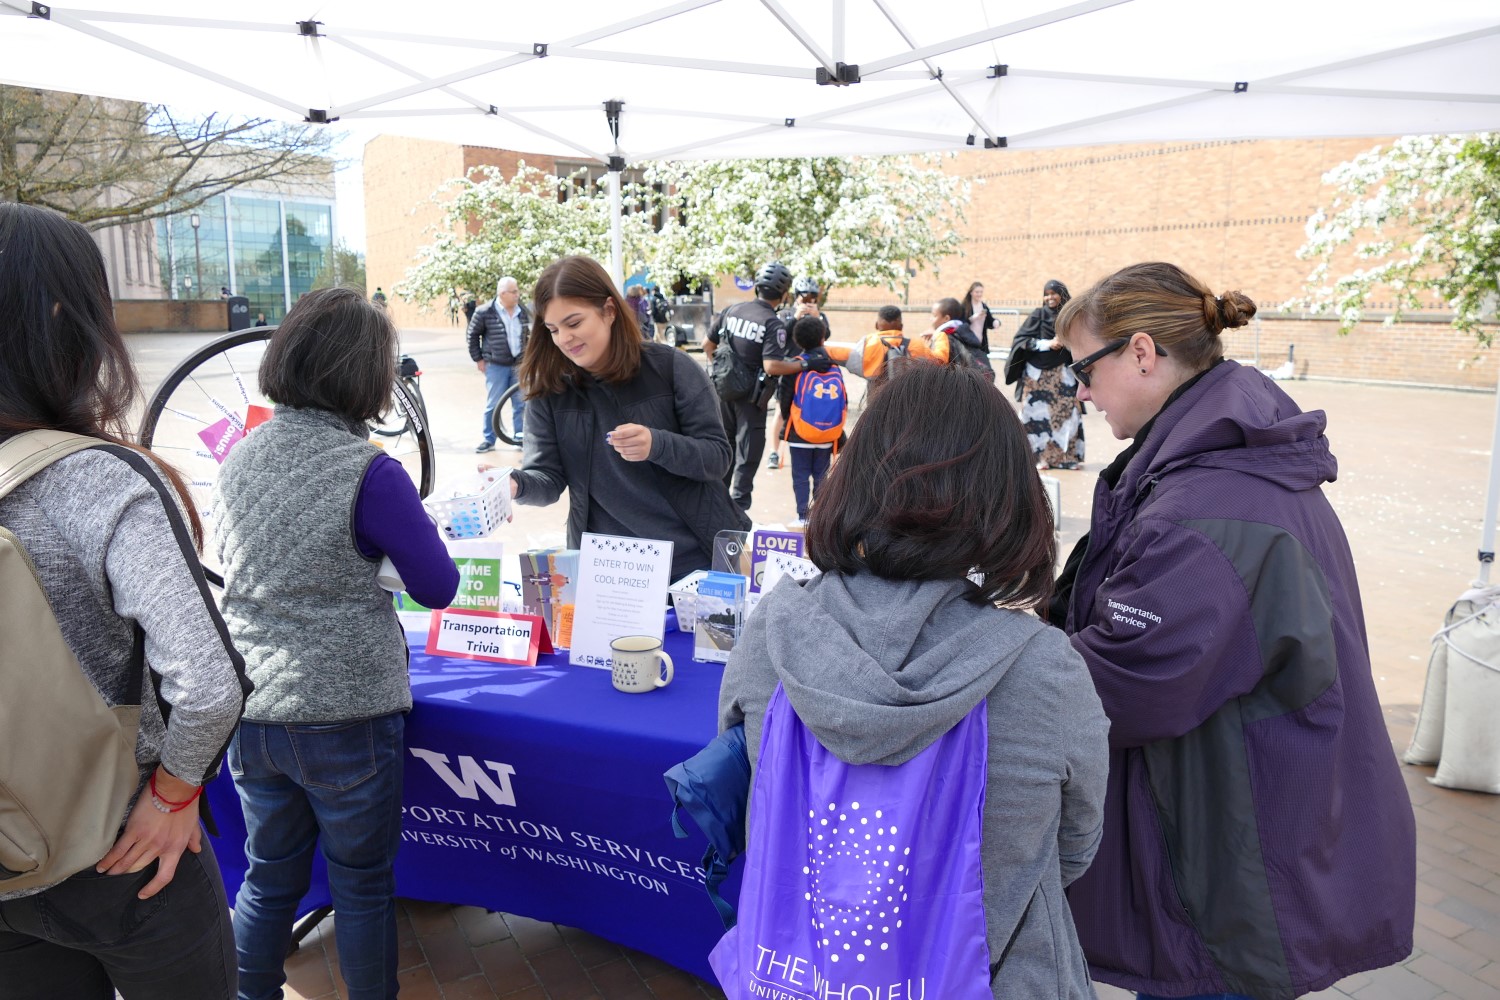 Staff from UW Transportation Services interacts with campus community.